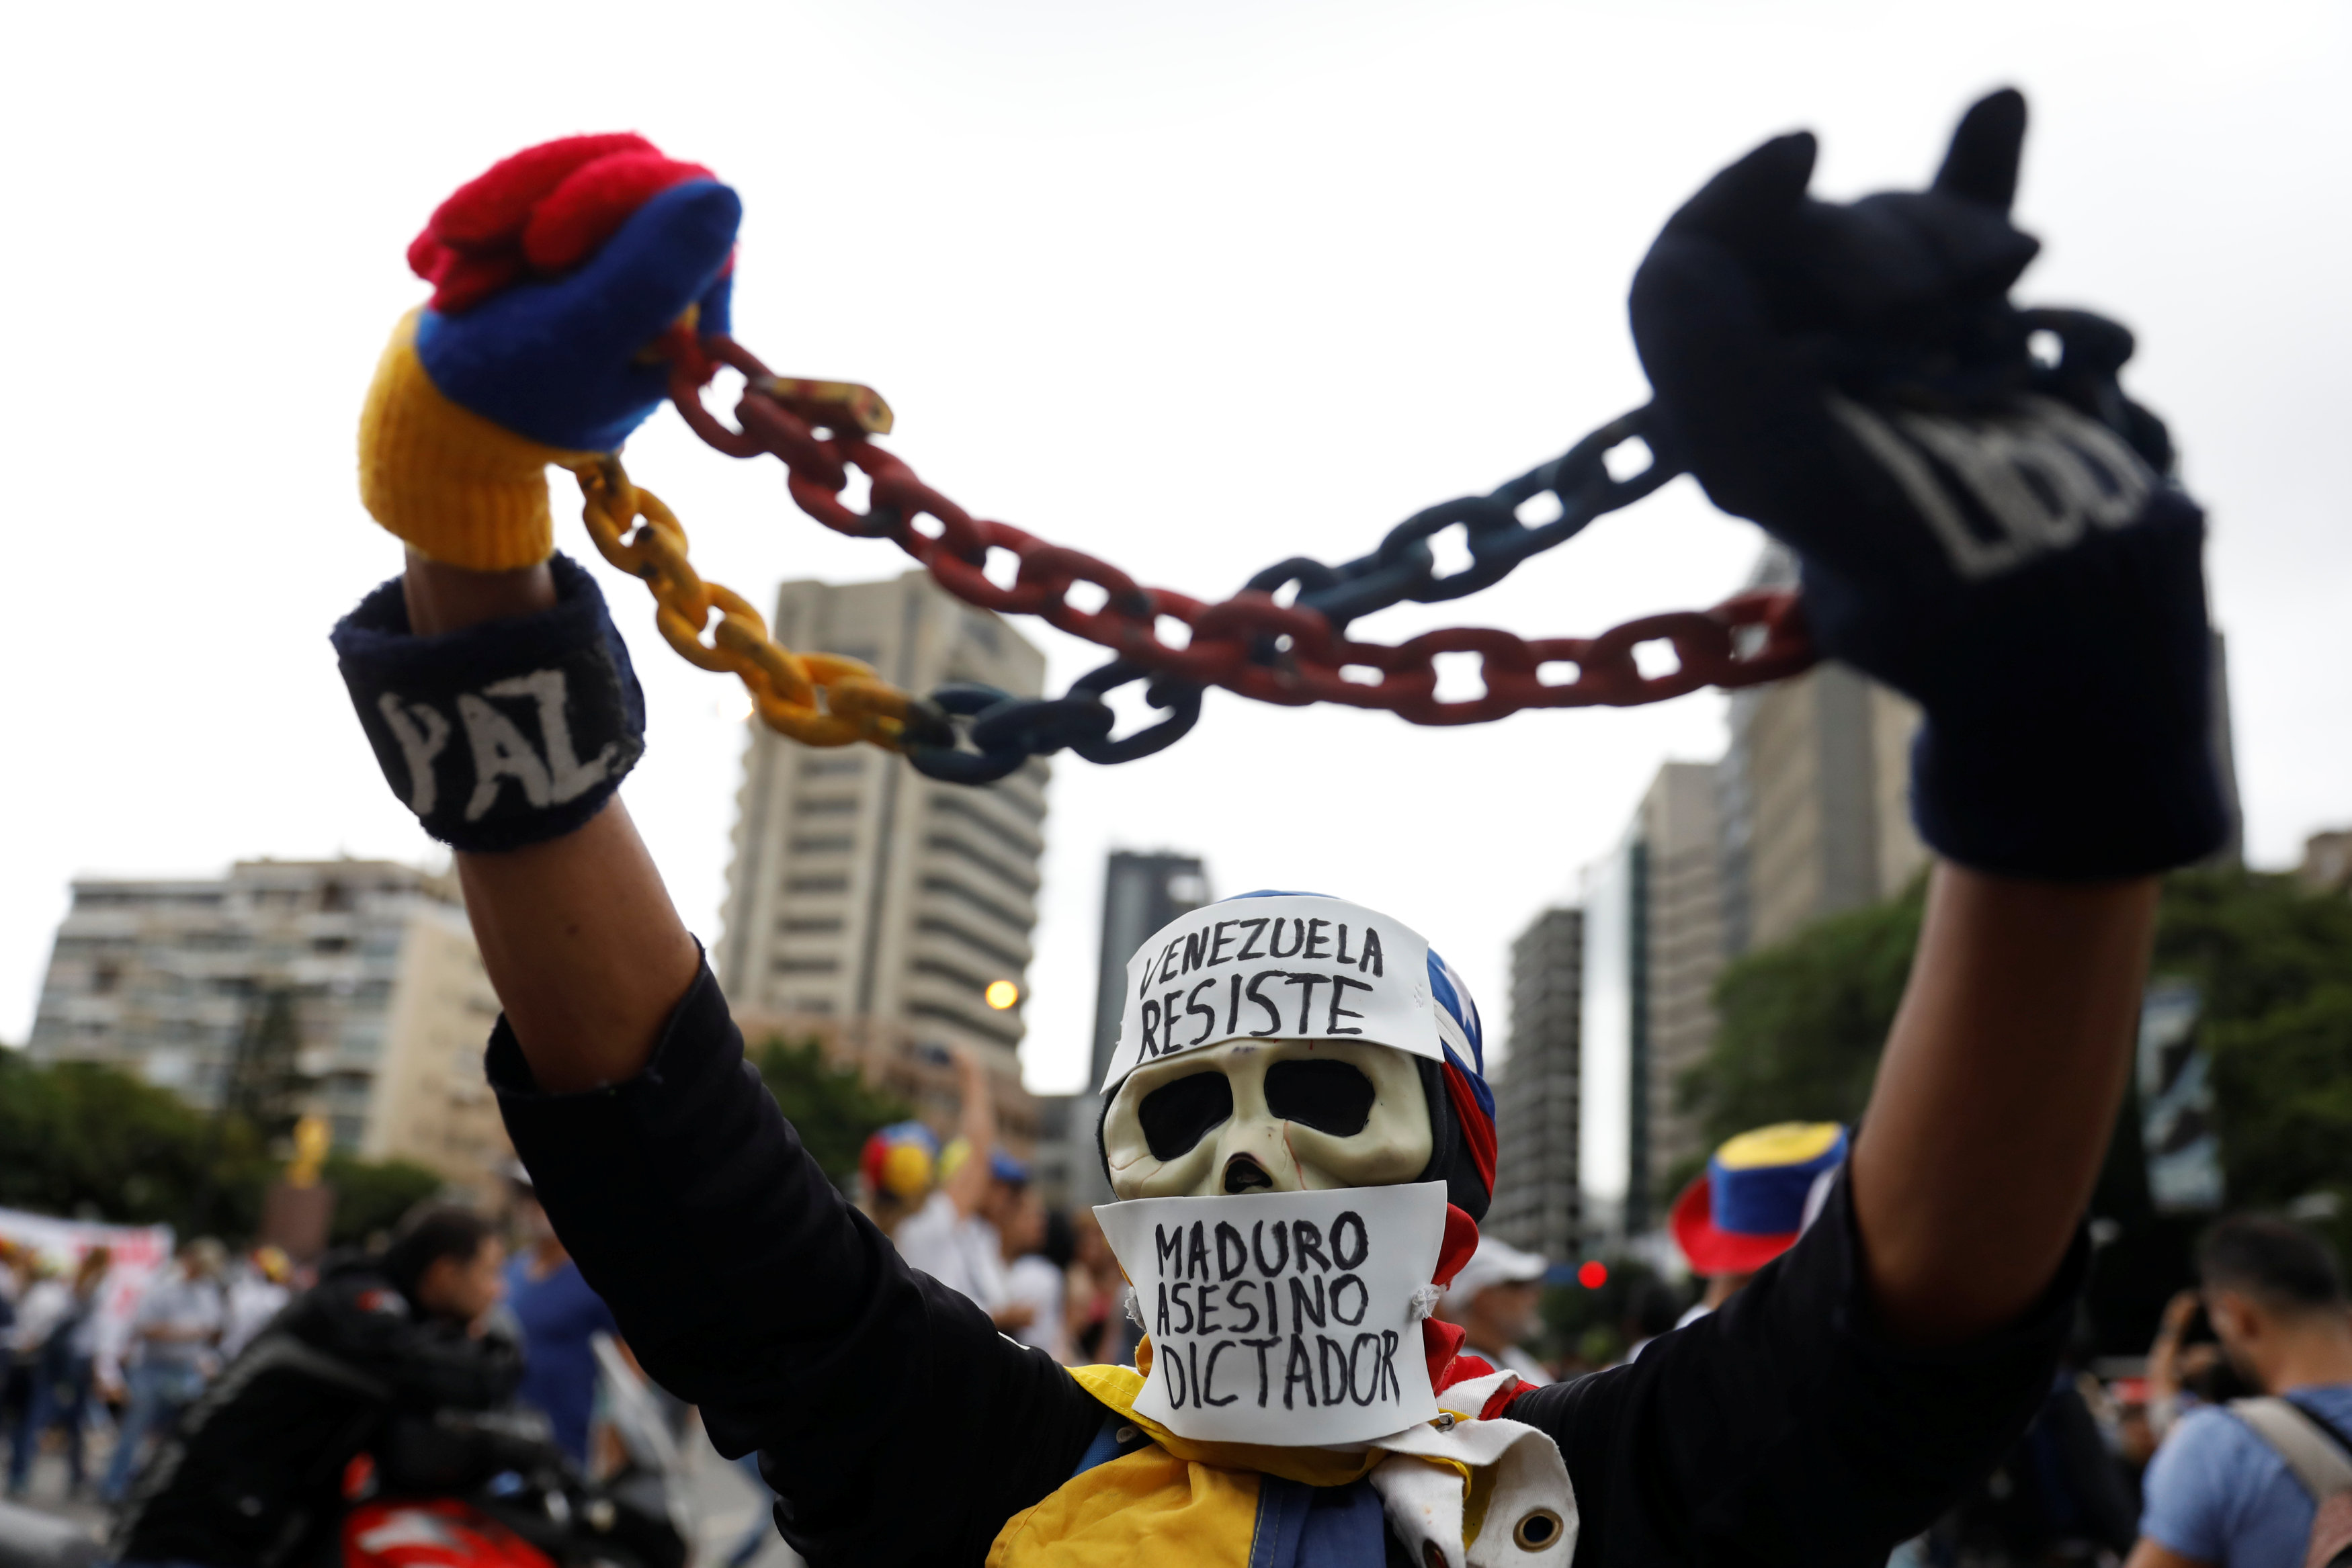 Venezuelan leader's foes, supporters hold rival May Day marches